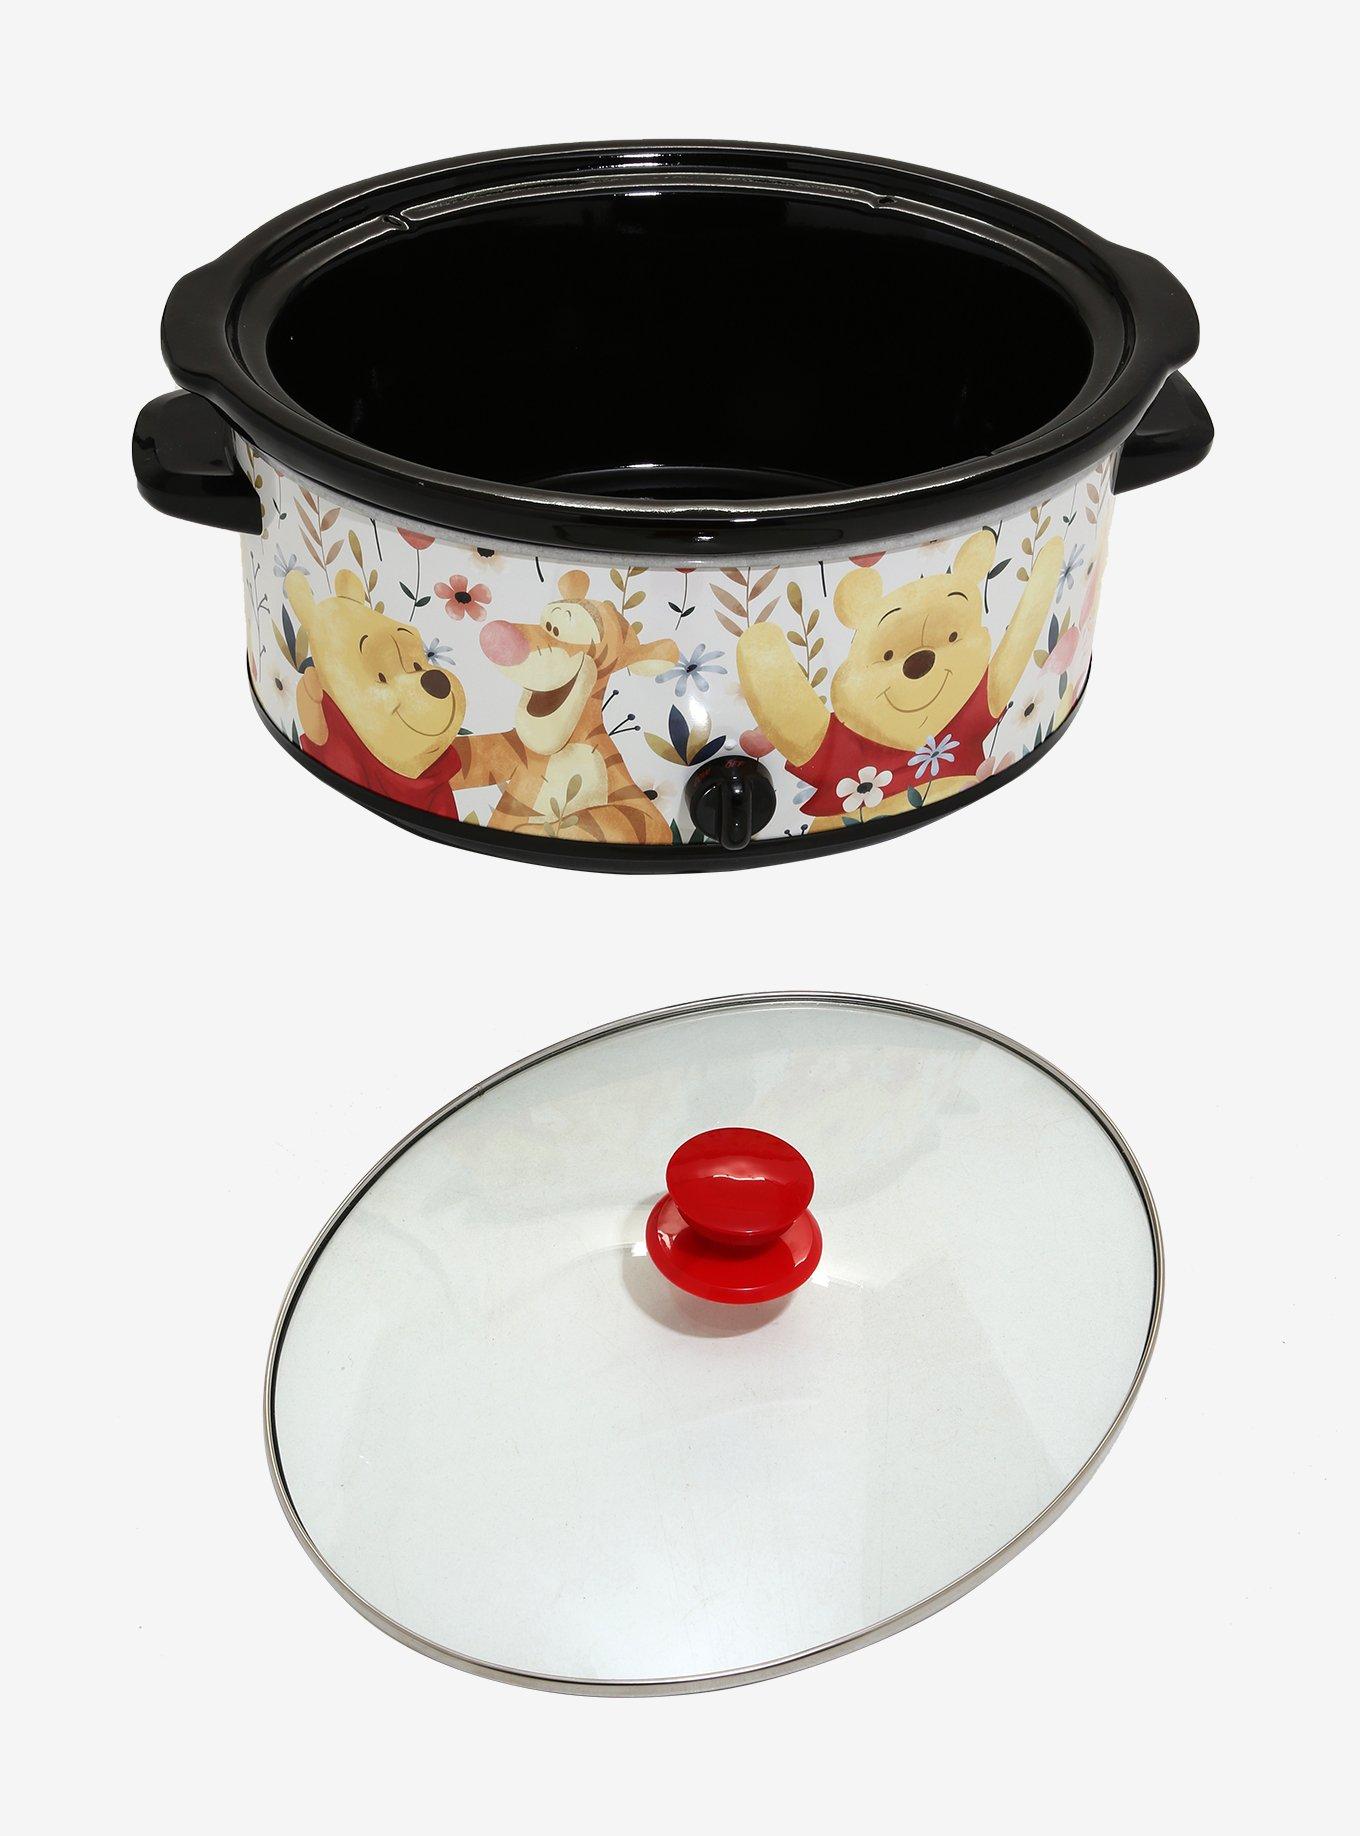 Is the Winnie The Pooh Crockpot Real?